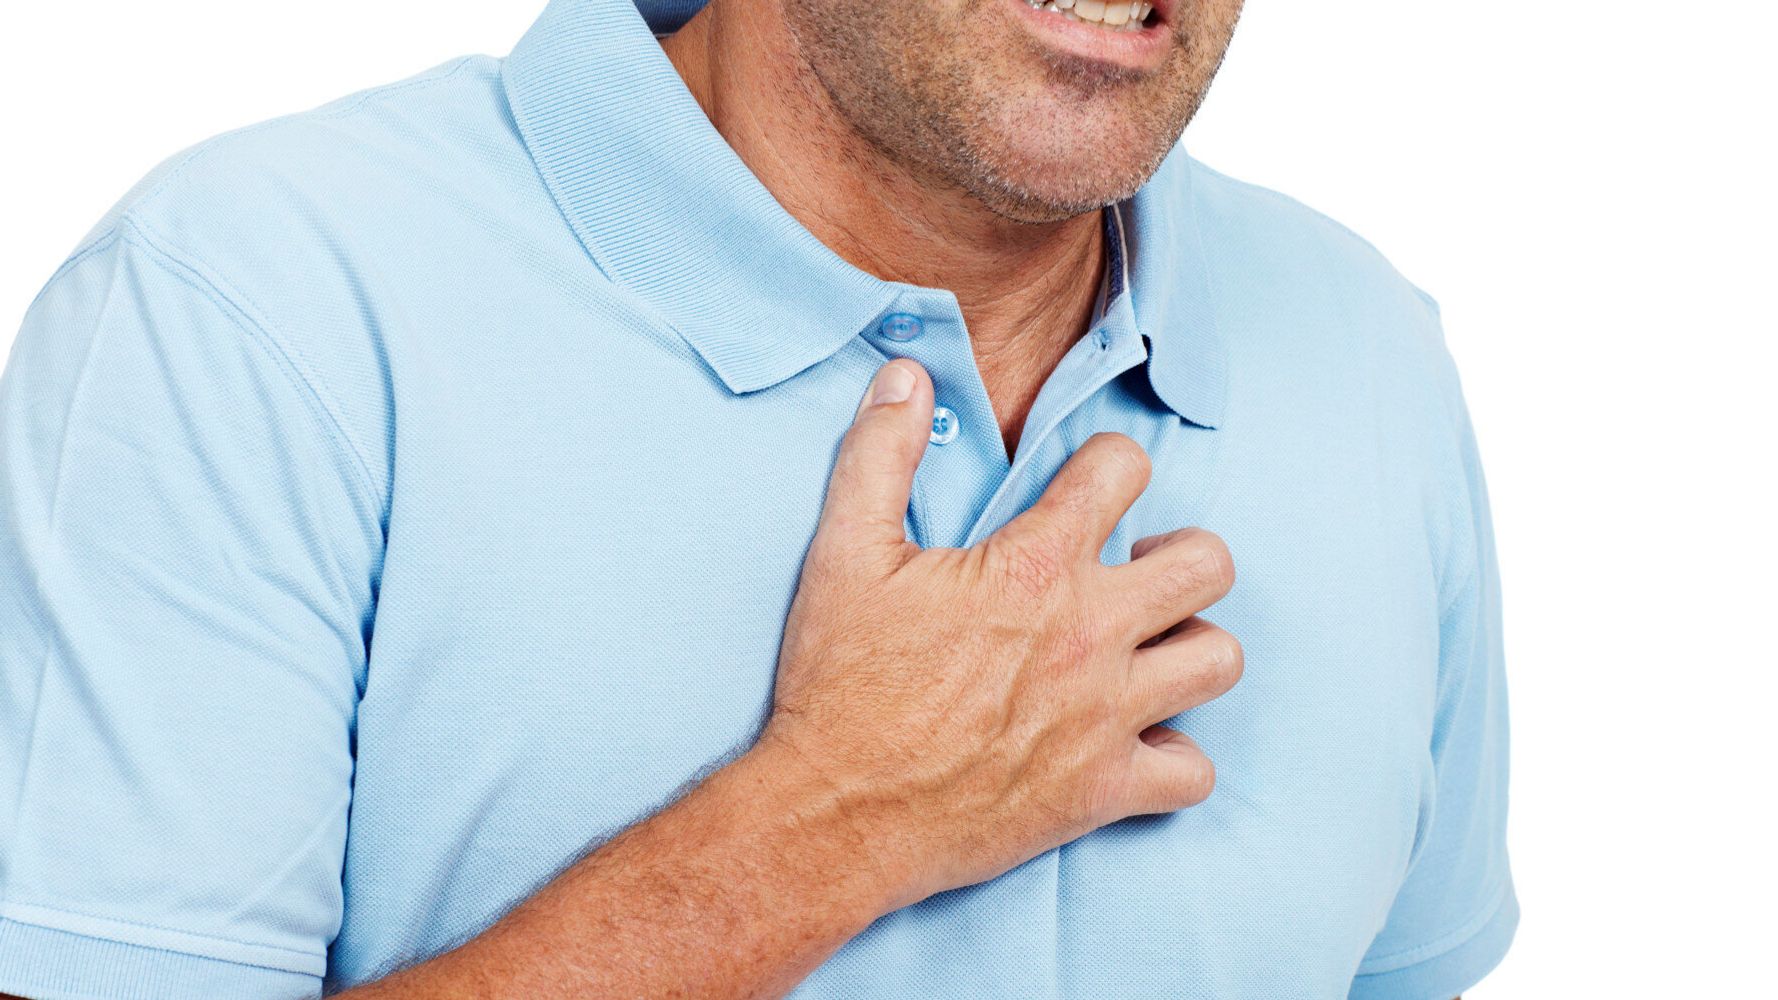 Heart Attack Signs 50 Of Middle Aged Men Have Symptoms One Month Free 